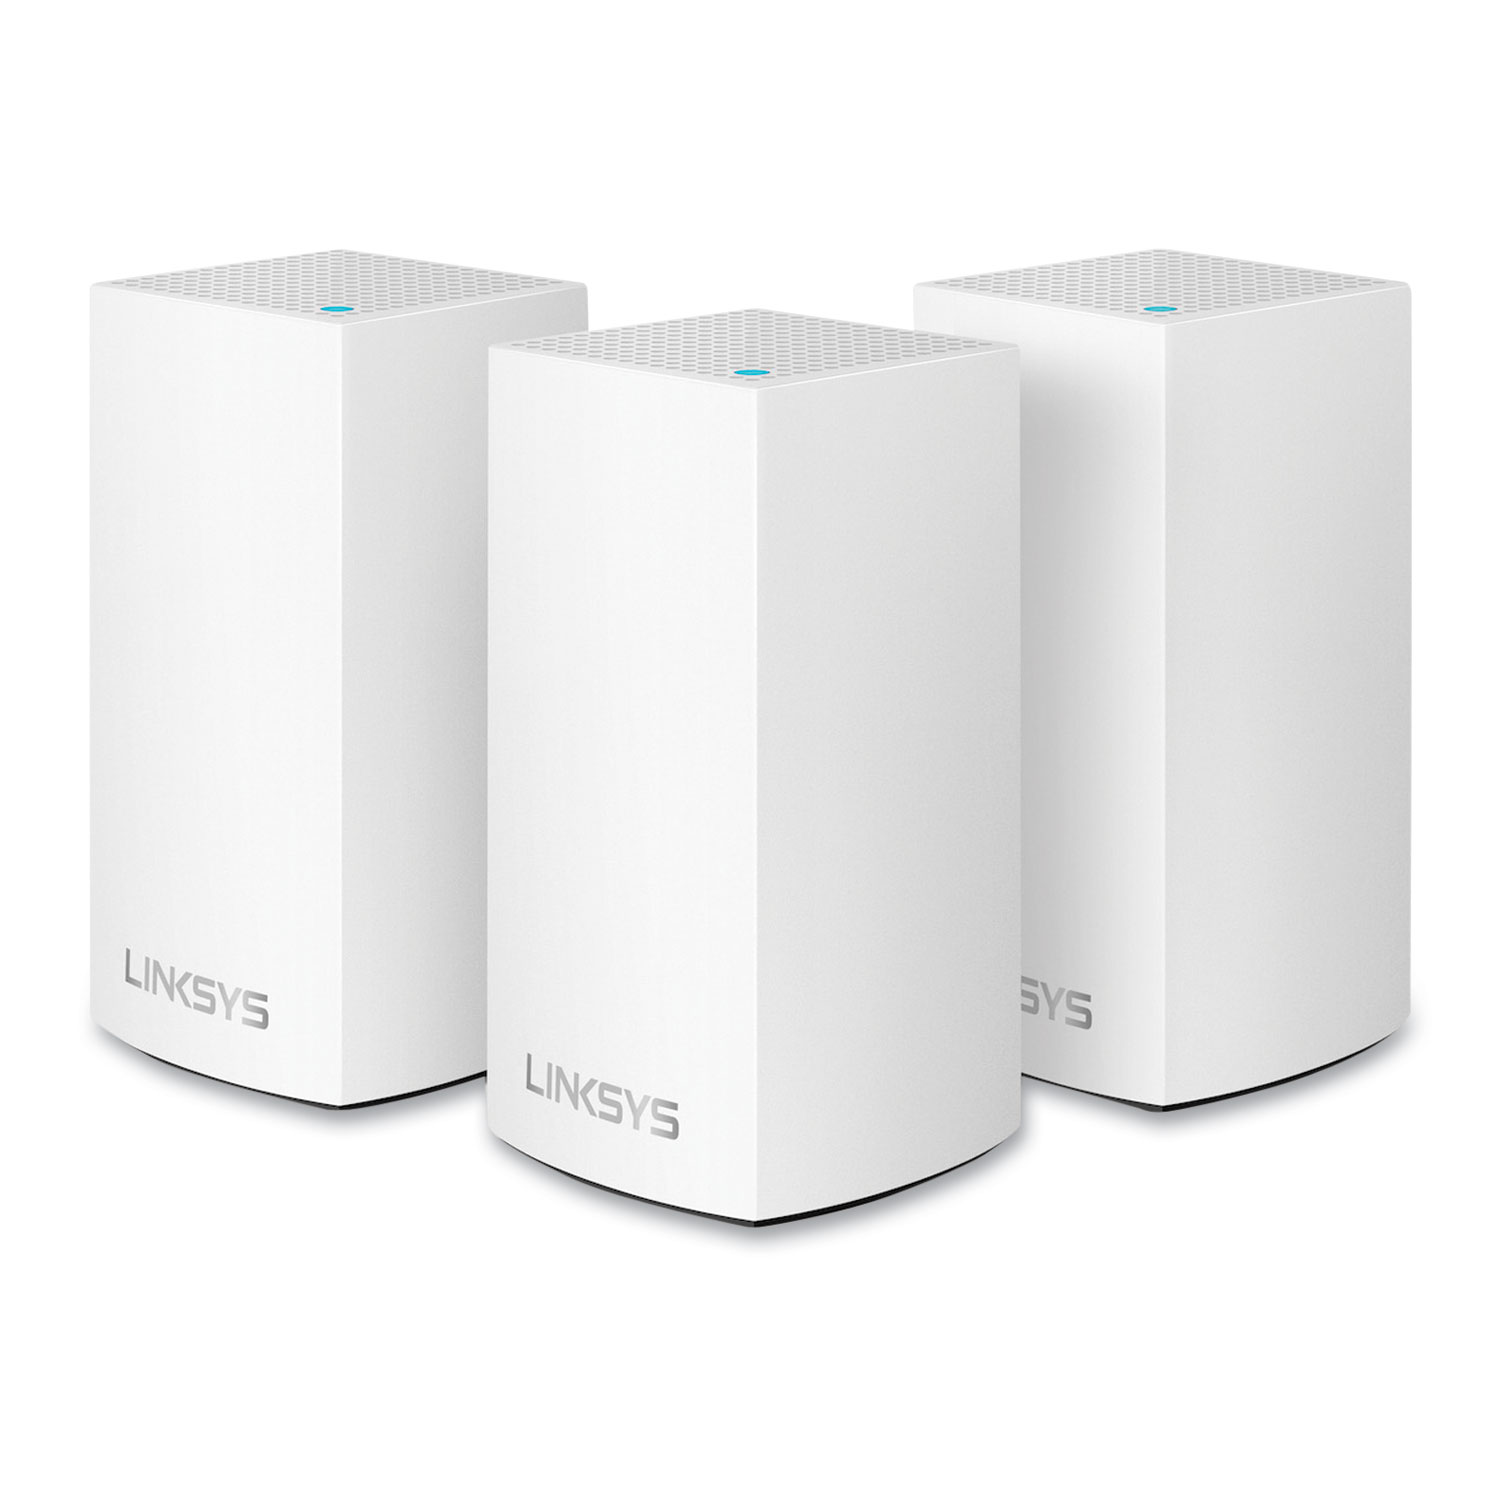  LINKSYS WHW0103 VELOP AC3900 Whole Home Mesh WiFi Dual Band, 1 Port, 2.4GHz/5GHz (LNKWHW0103) 